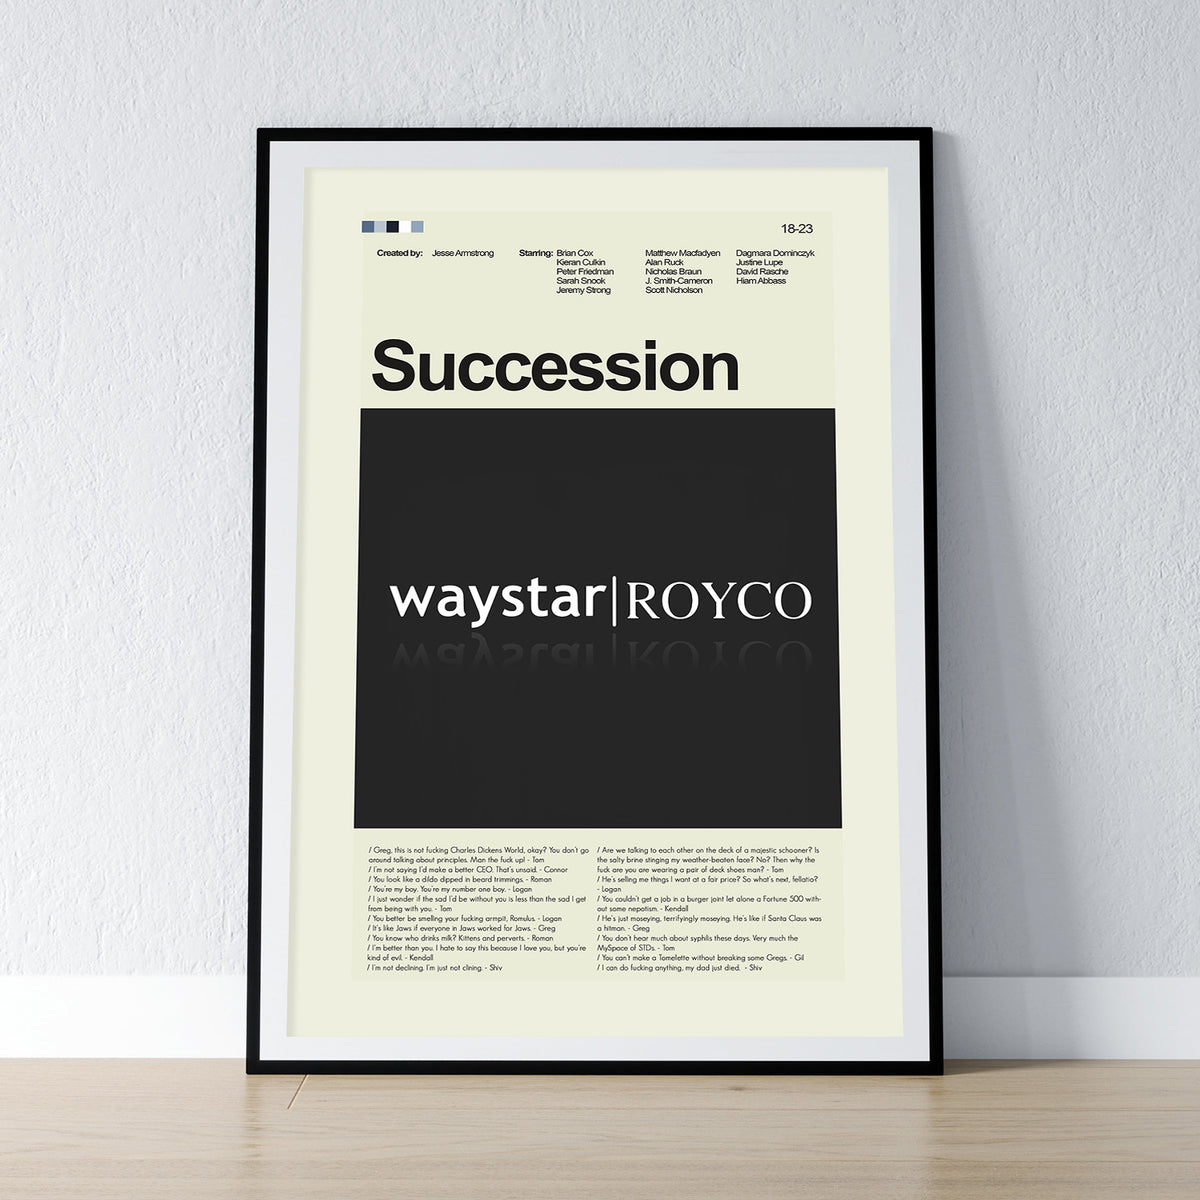 Succession - Logo or Helicopter| 12"x18" or 18"x24" Print only